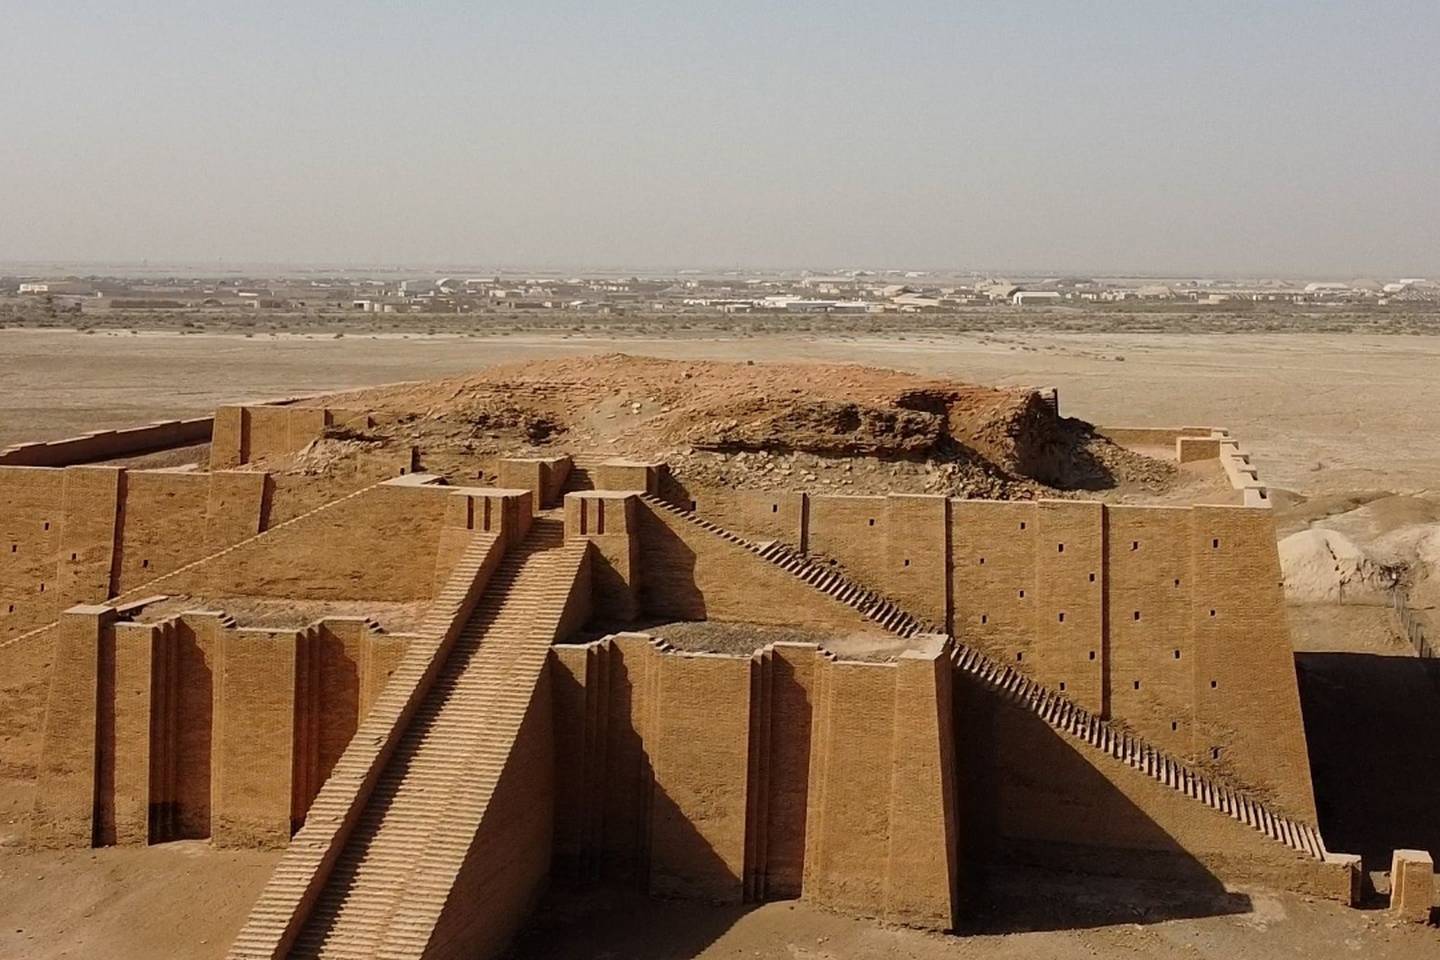 Thi Qar Archaeologist hopes to revive tourism in southern Iraq